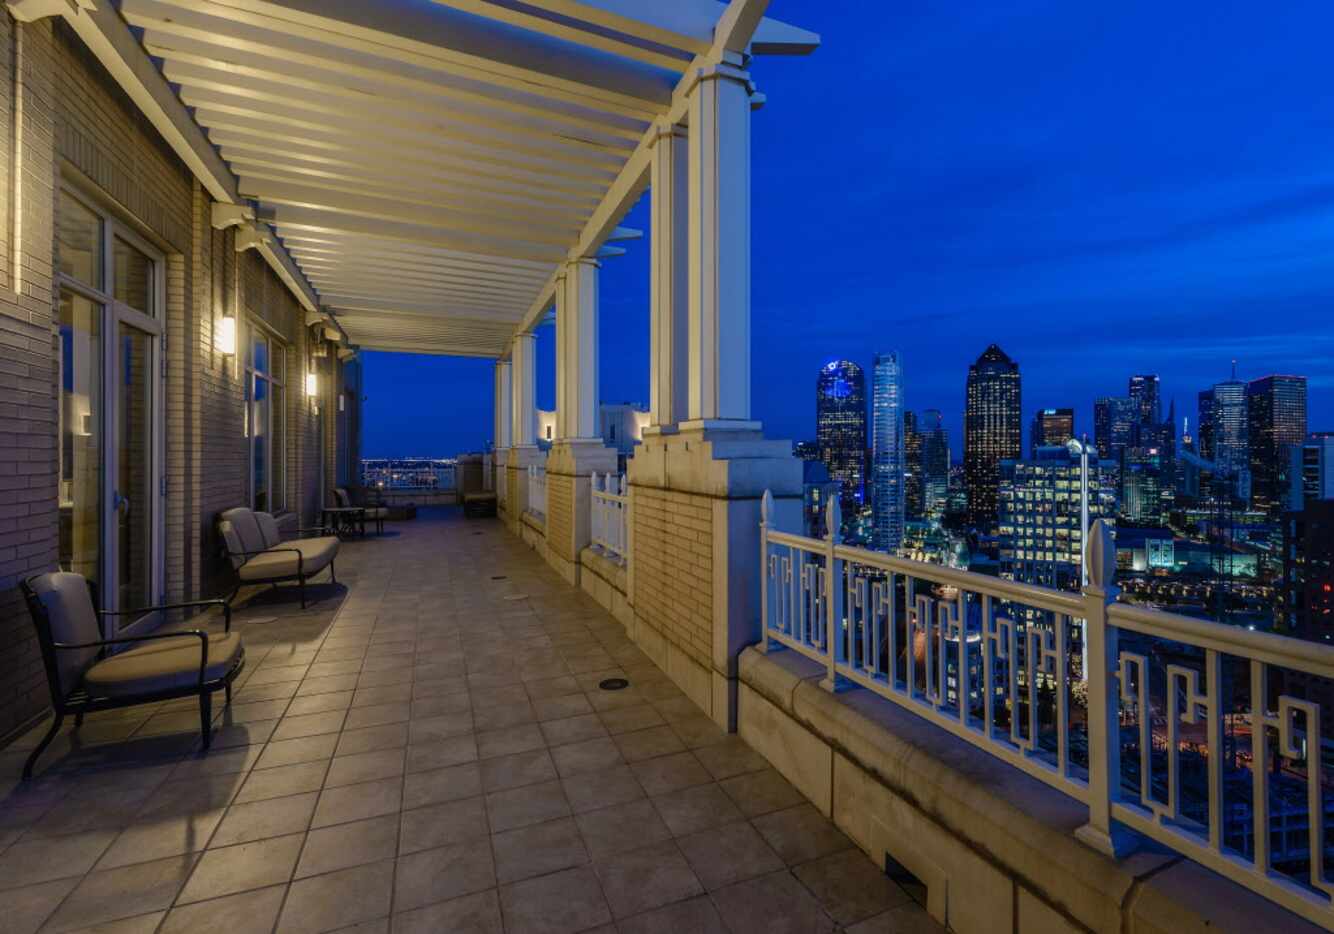 The 22nd floor penthouse at the Ritz-Carlton condo tower in Uptown is on the market for $7.5...